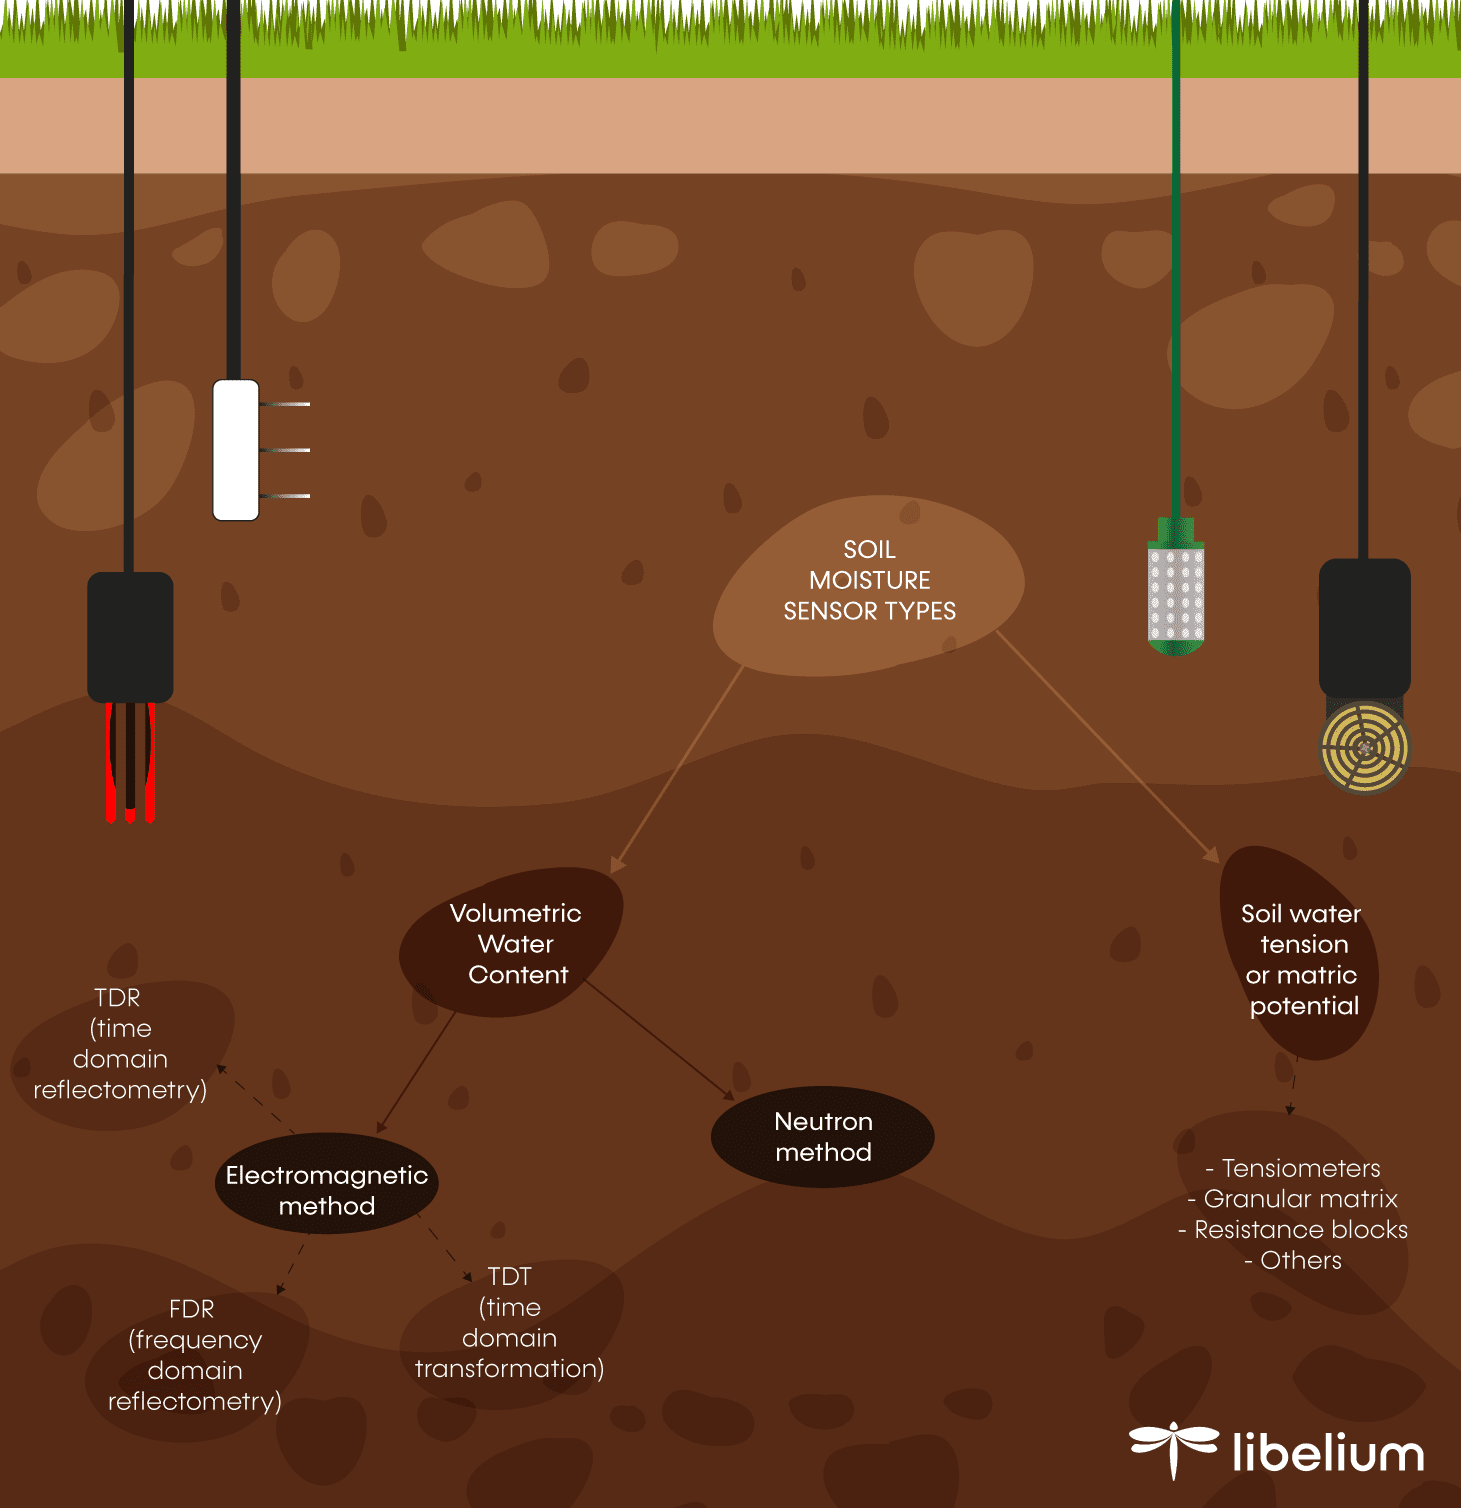 Everything you need to know about soil moisture measurement